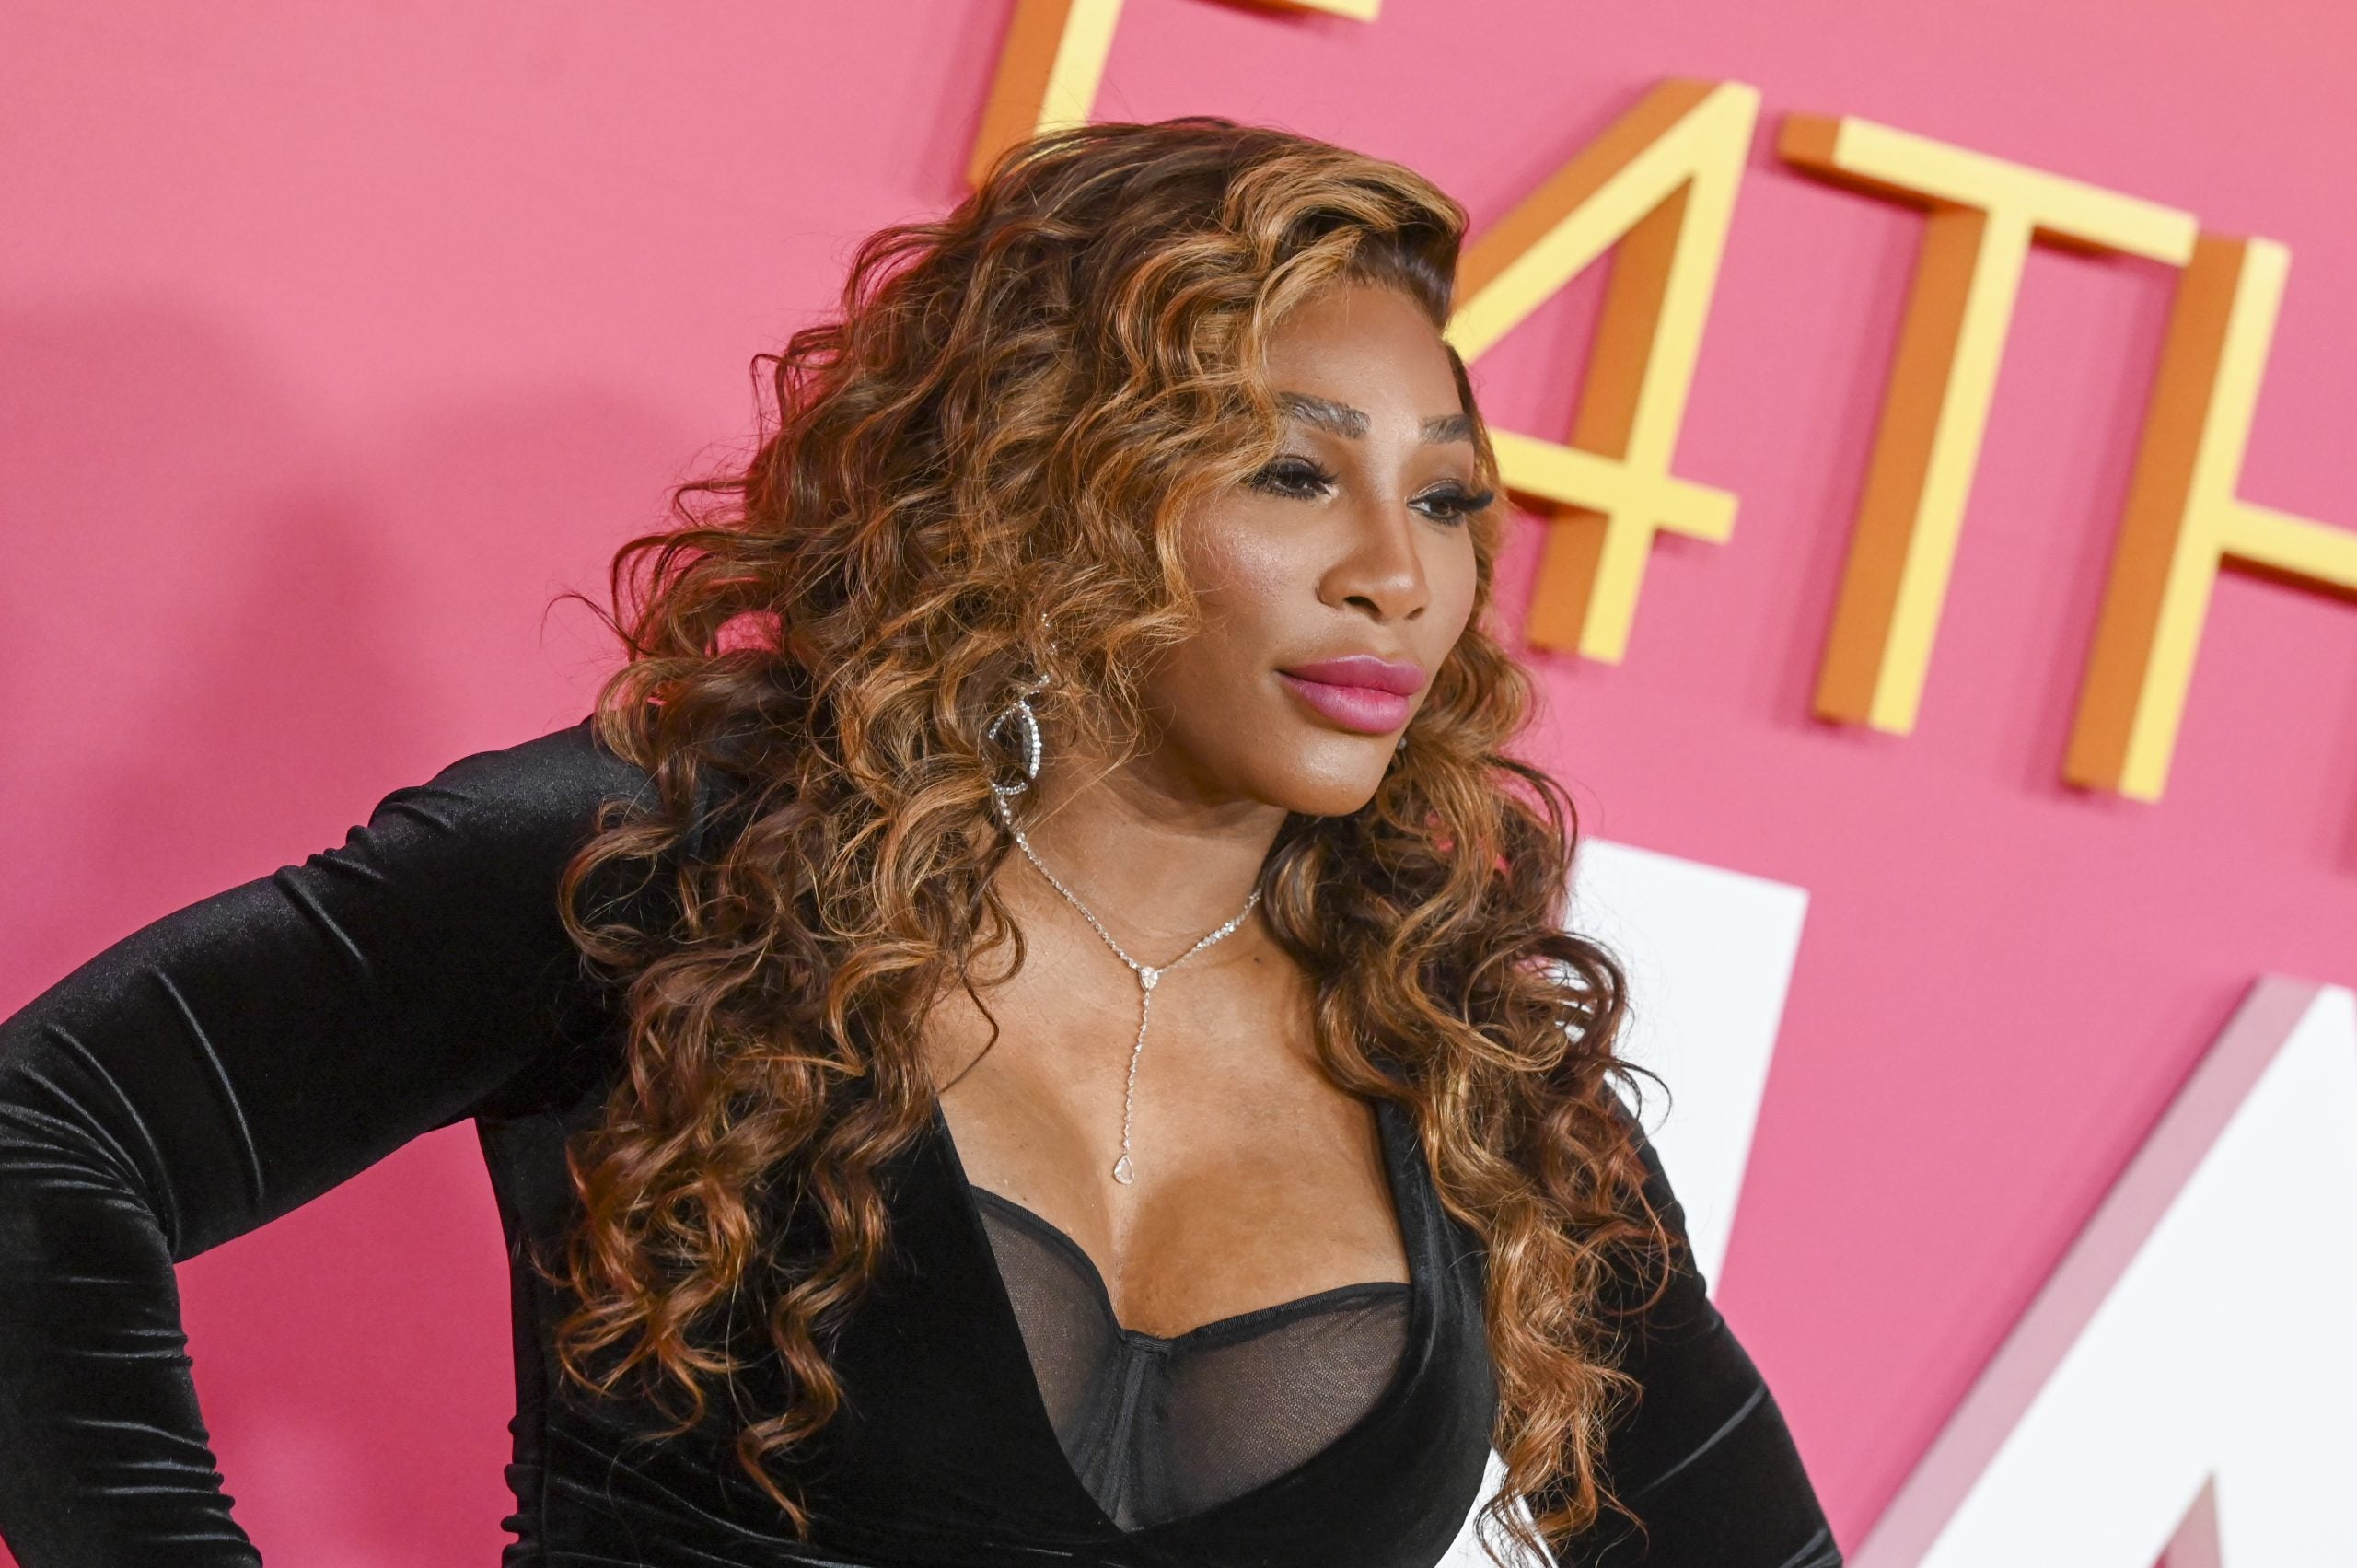 Serena Williams ‘In The Arena’ Docuseries Set To Debut On ESPN